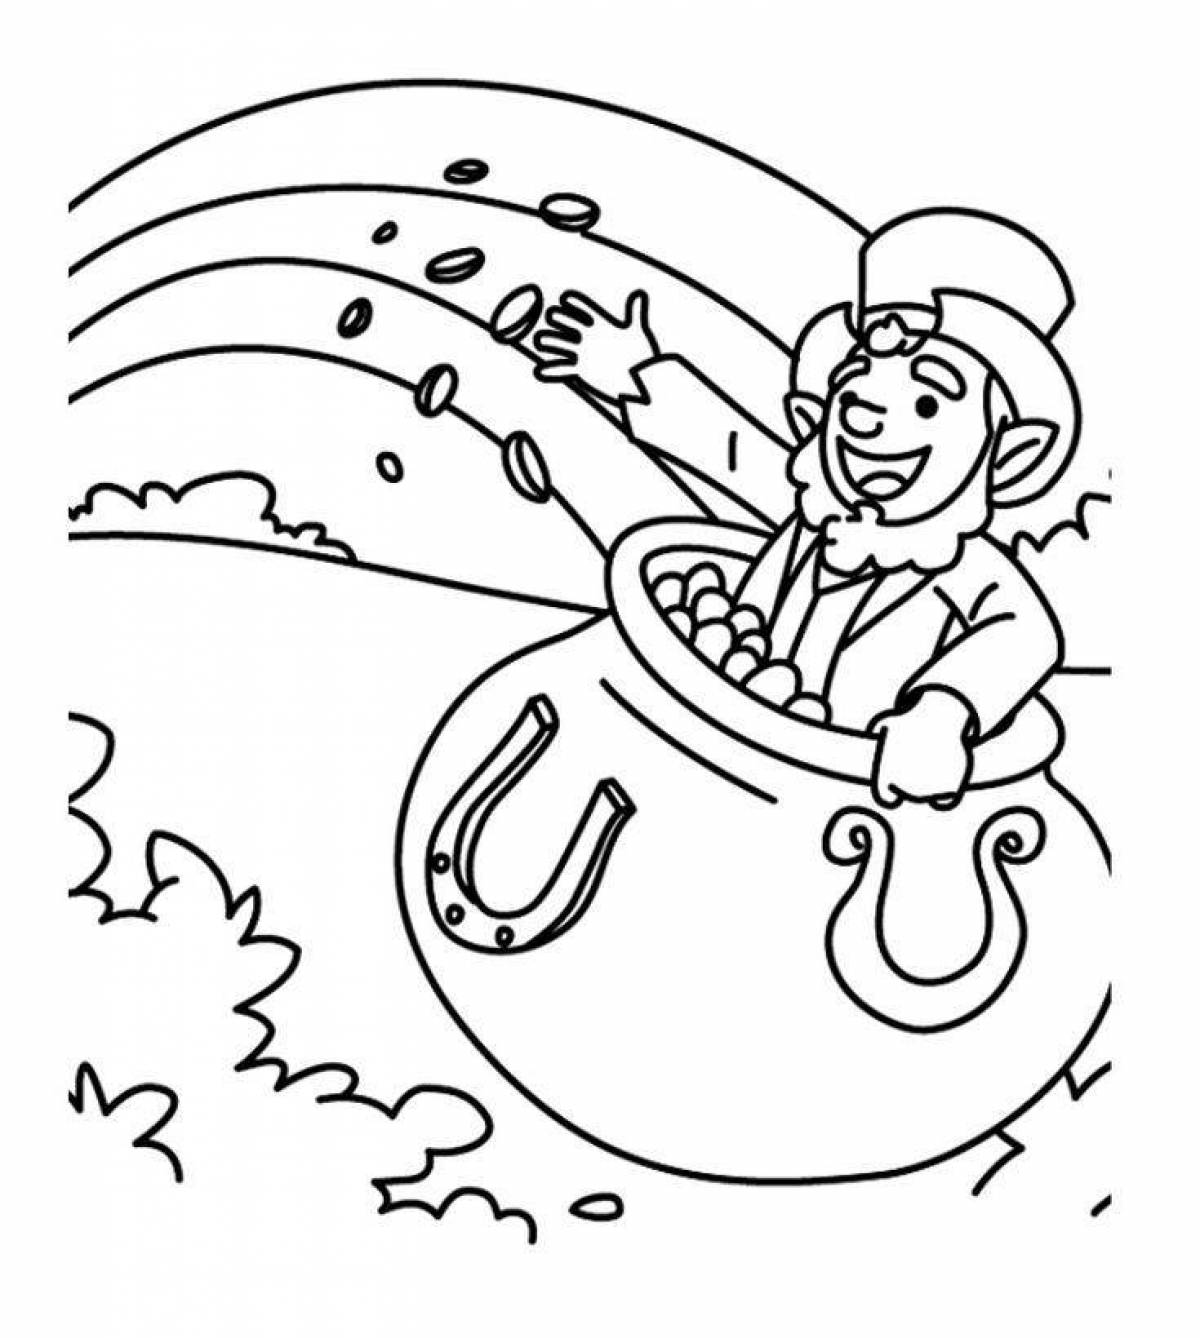 Glowing one day coloring page